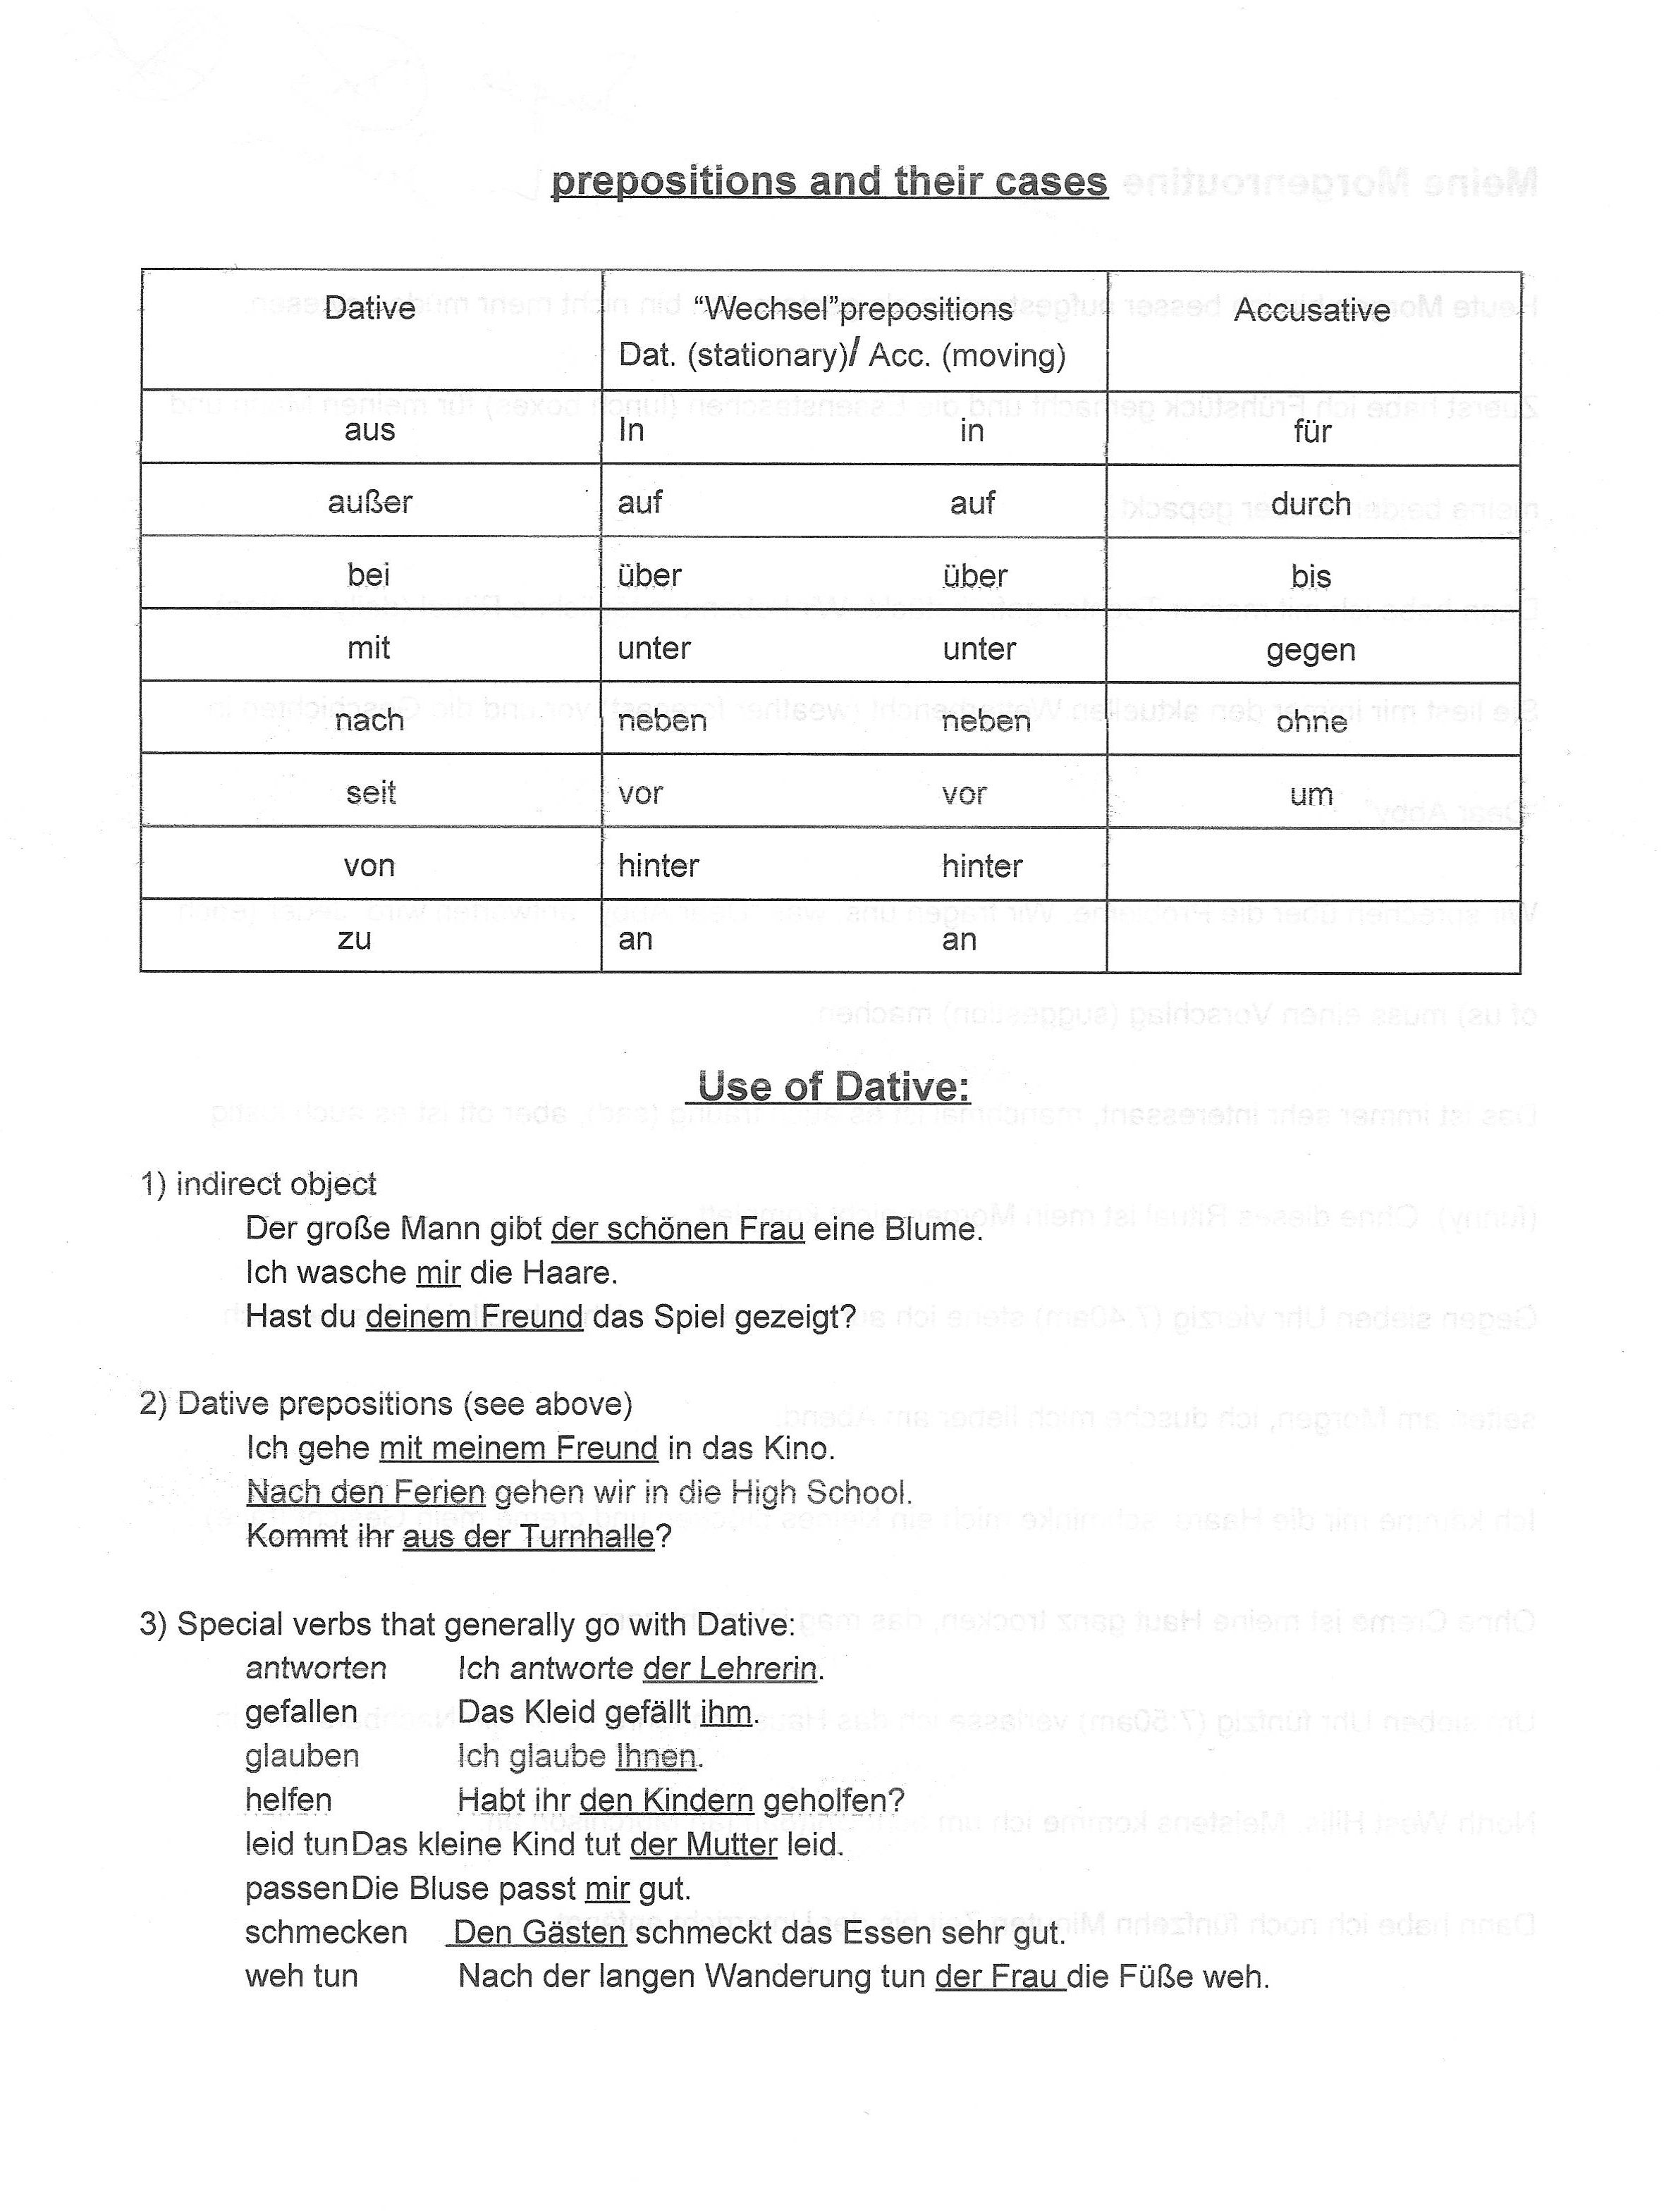 verbs-adjectives-nouns-with-prepositions-exercises-pdf-verified